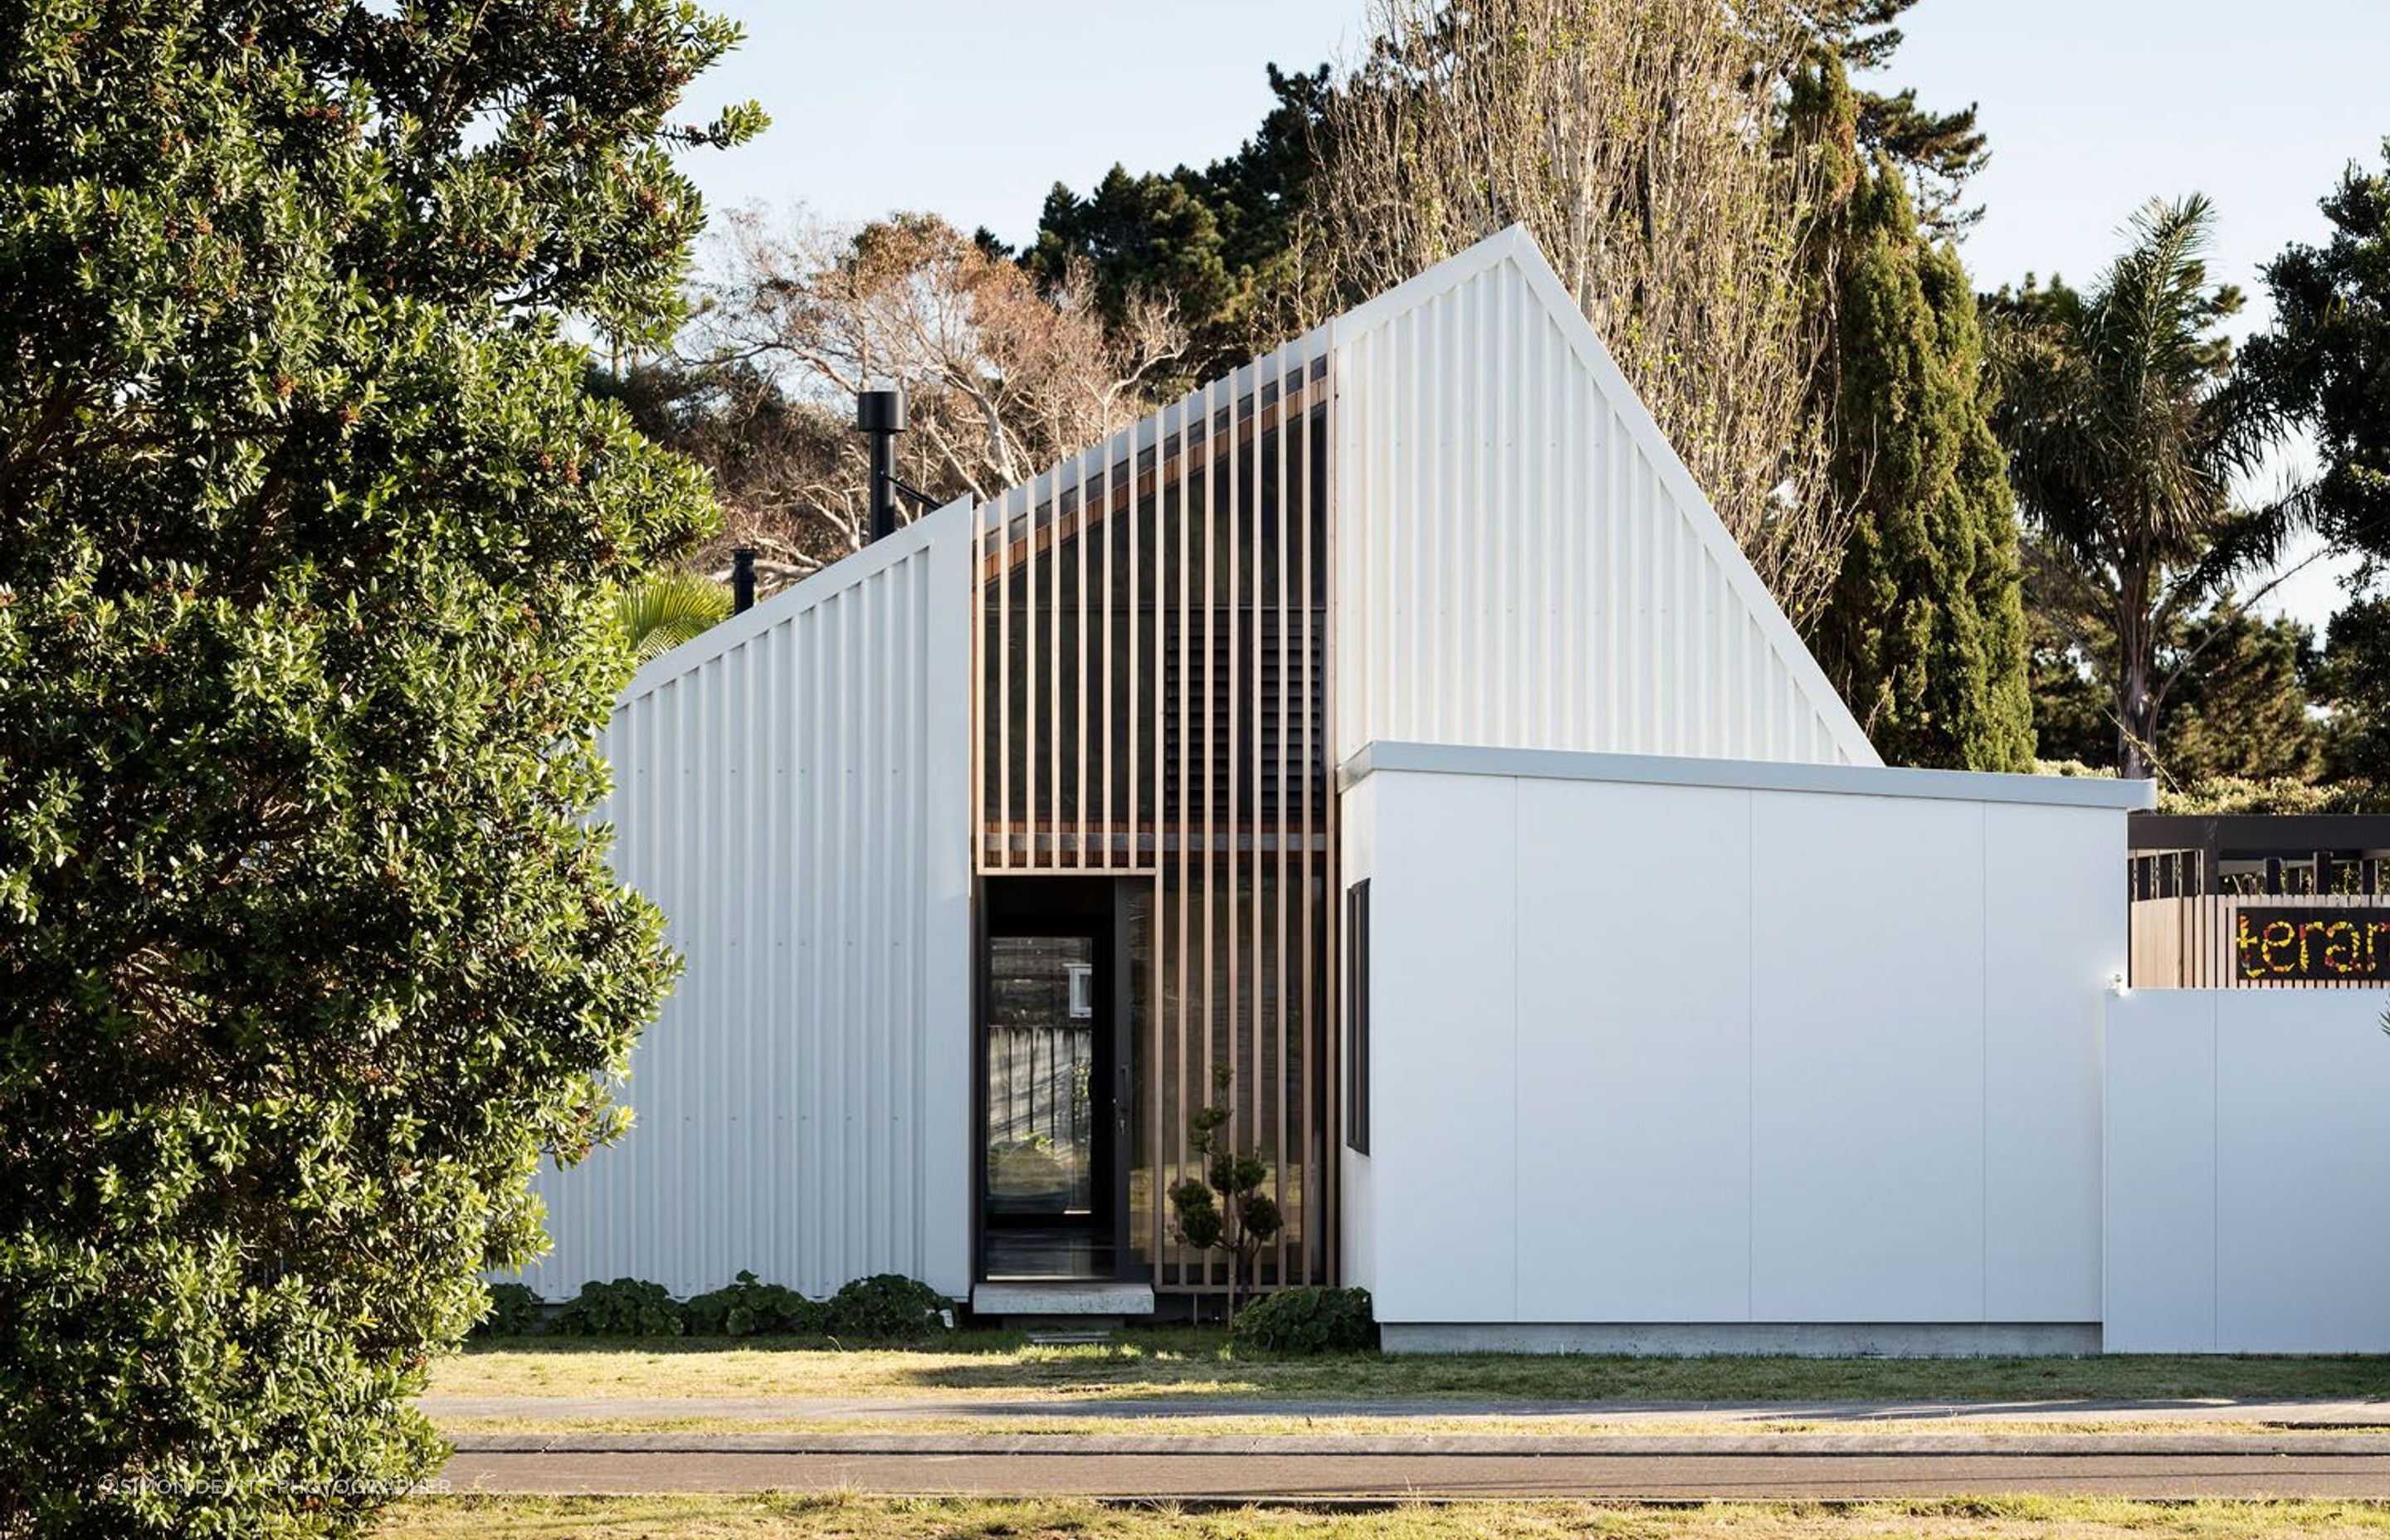 Teranui was a compact bach designed by ata for two families to share in Pauanui.